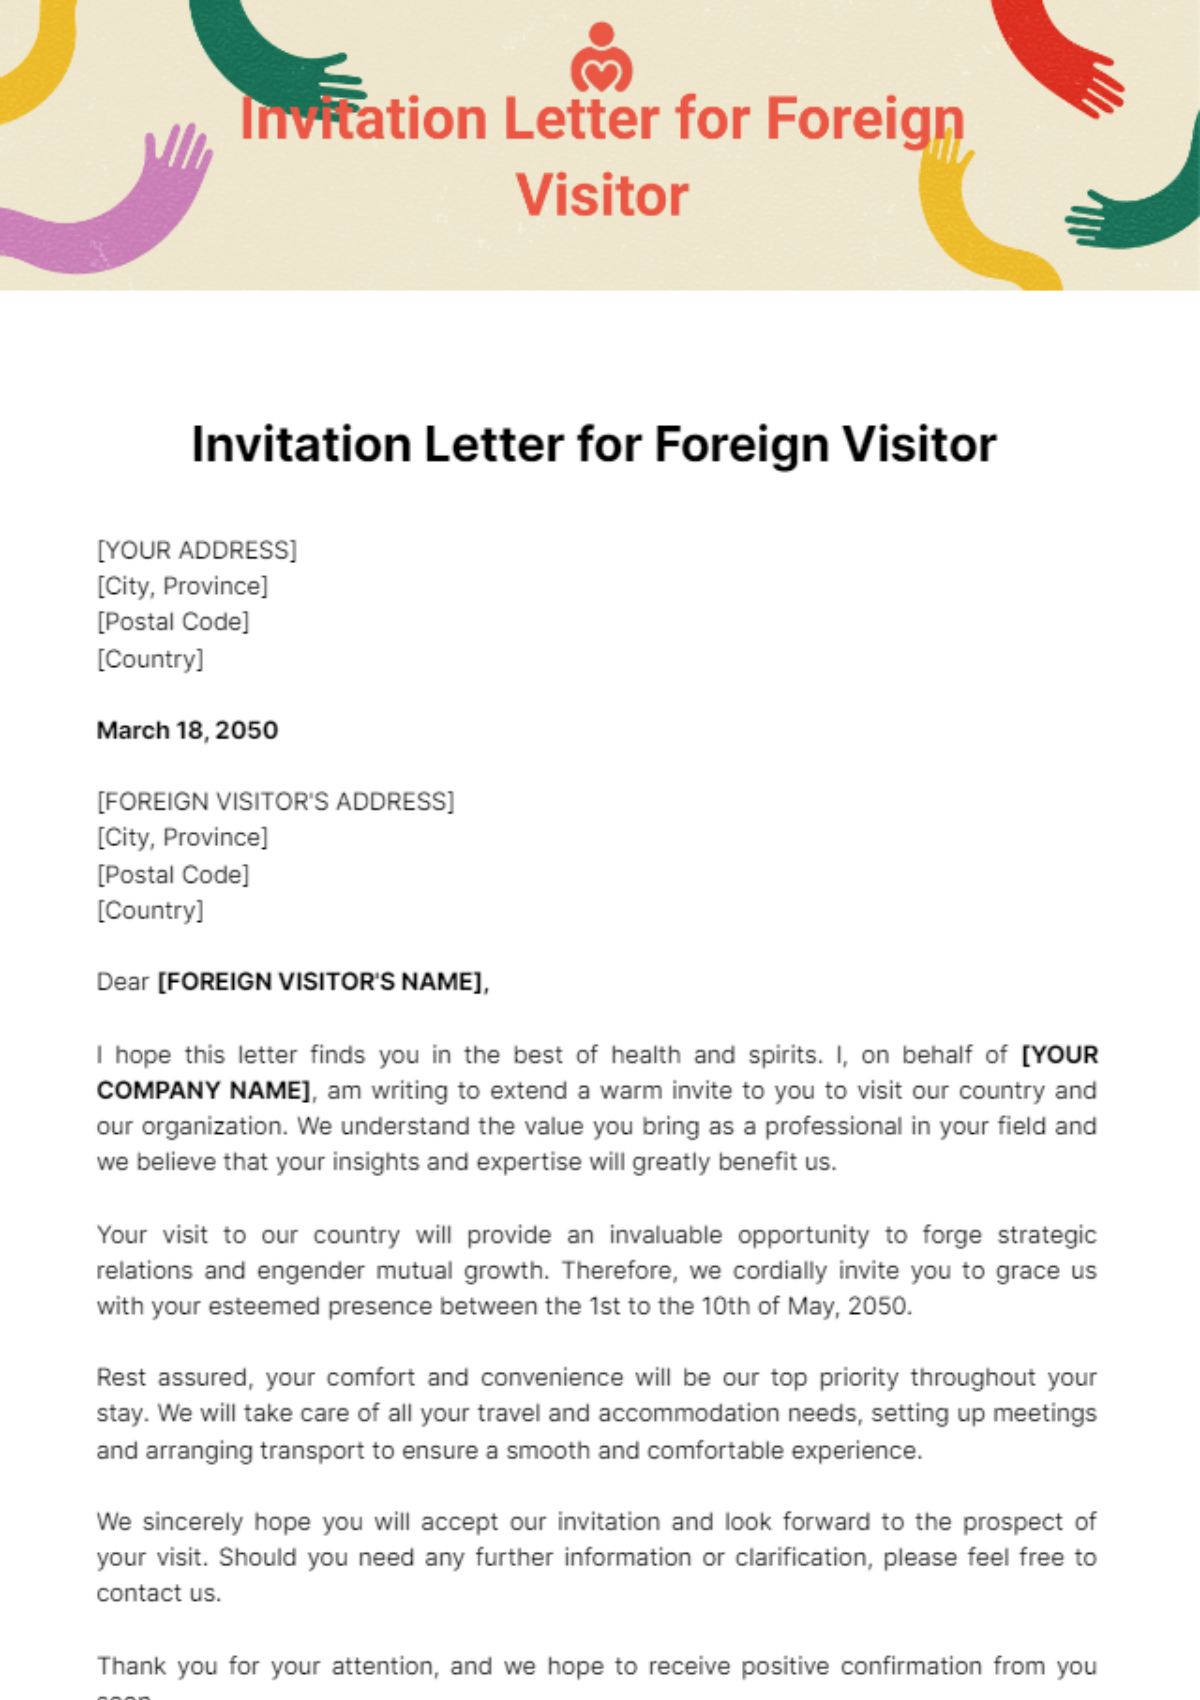 Invitation Letter for Foreign Visitor Template